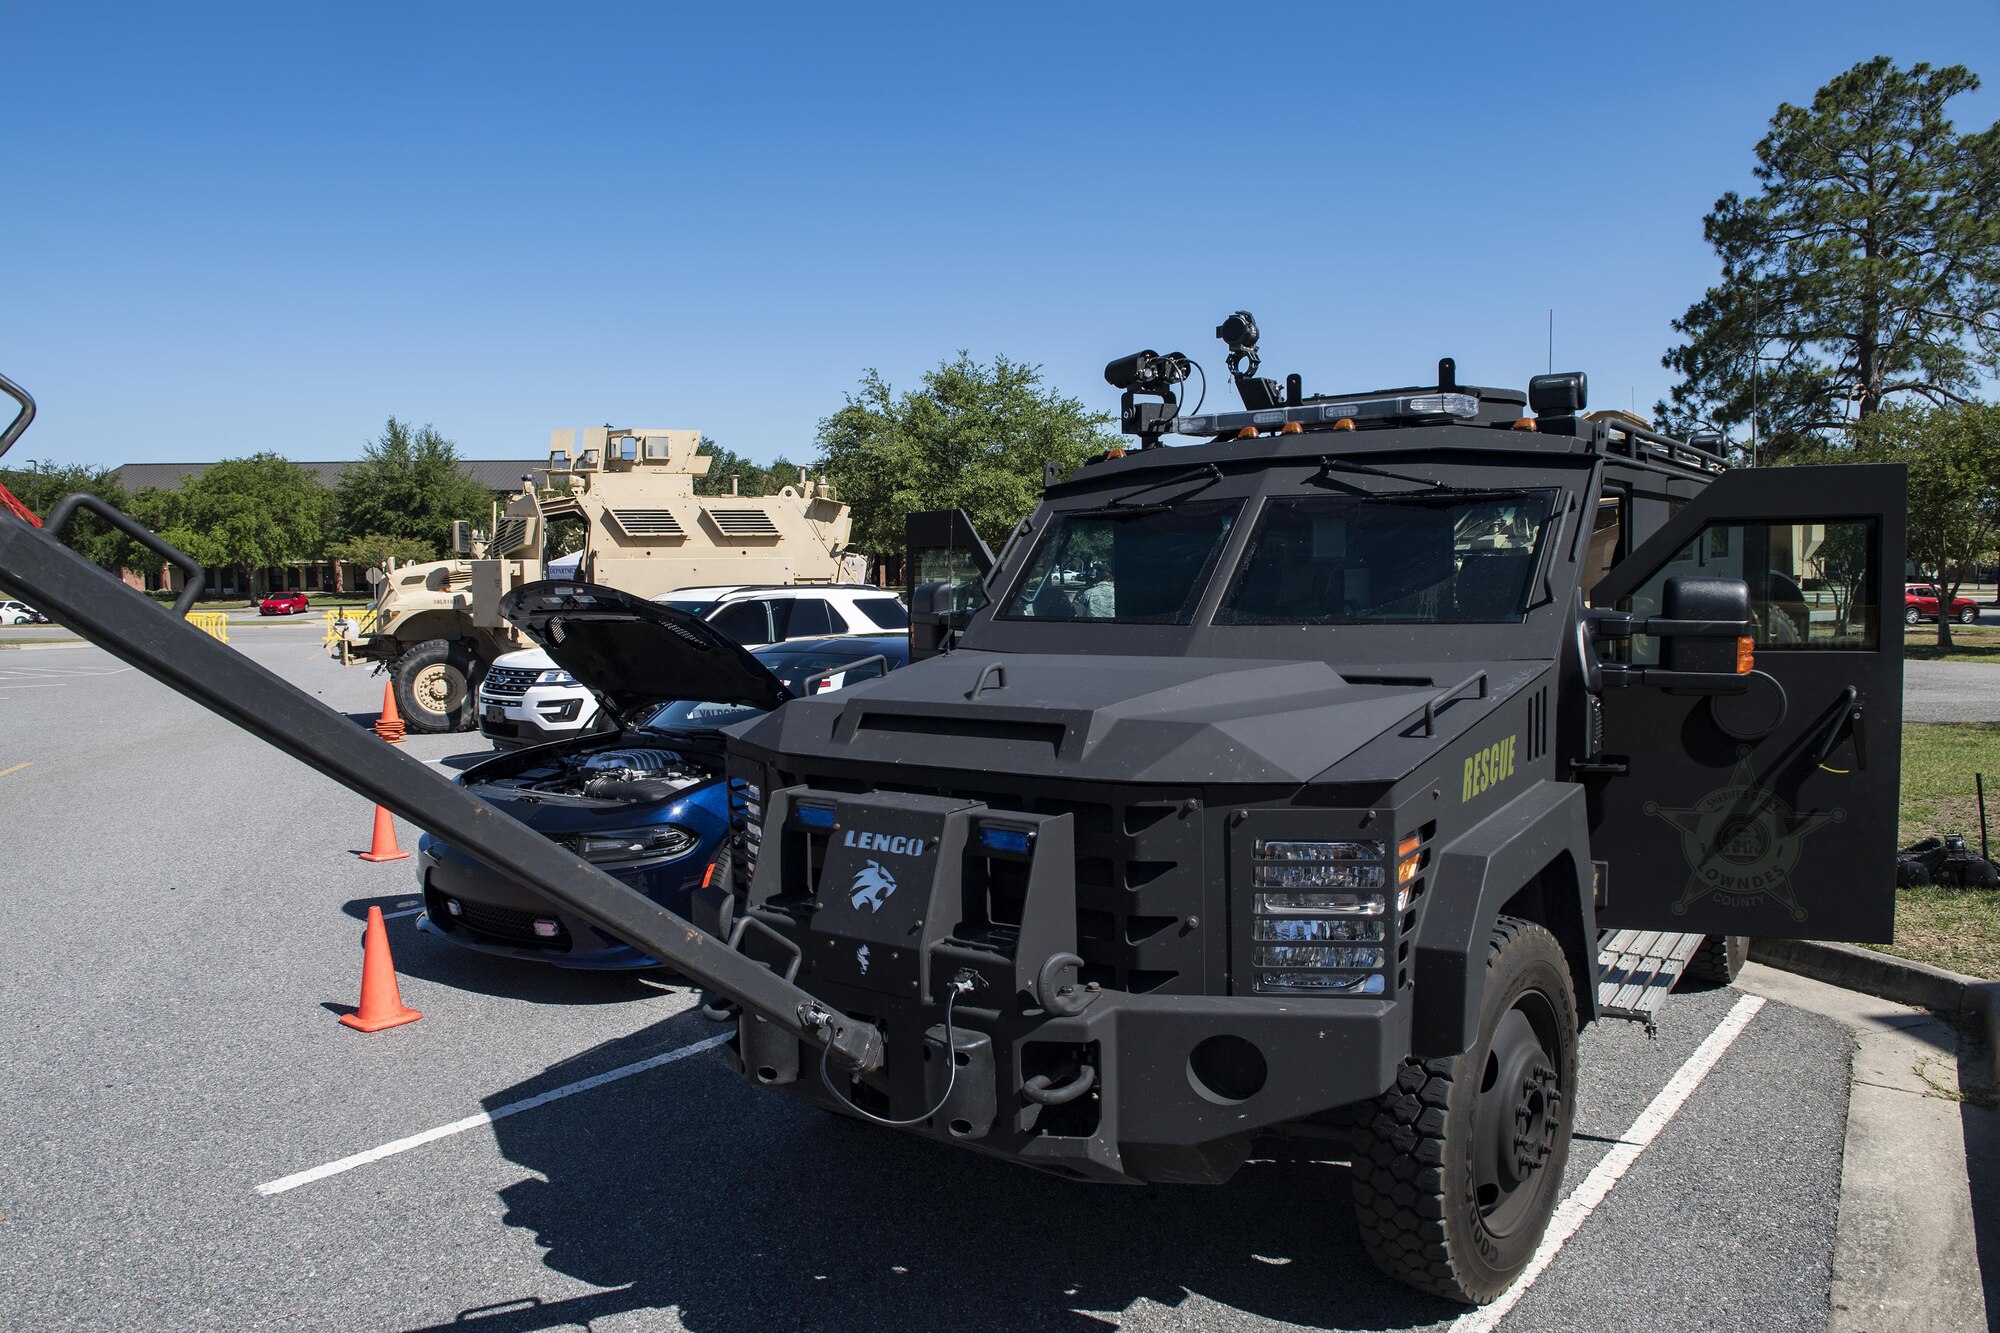 A tactical vehicle from the Lowndes County Sherriff’s office sits on display during the Police Week Car Show, May 16, 2017, at Moody Air Force Base, Ga. Different law enforcement vehicles were put on display for attendees to climb in and ask questions about. (U.S. Air Force photo Senior Airman Janiqua P. Robinson)